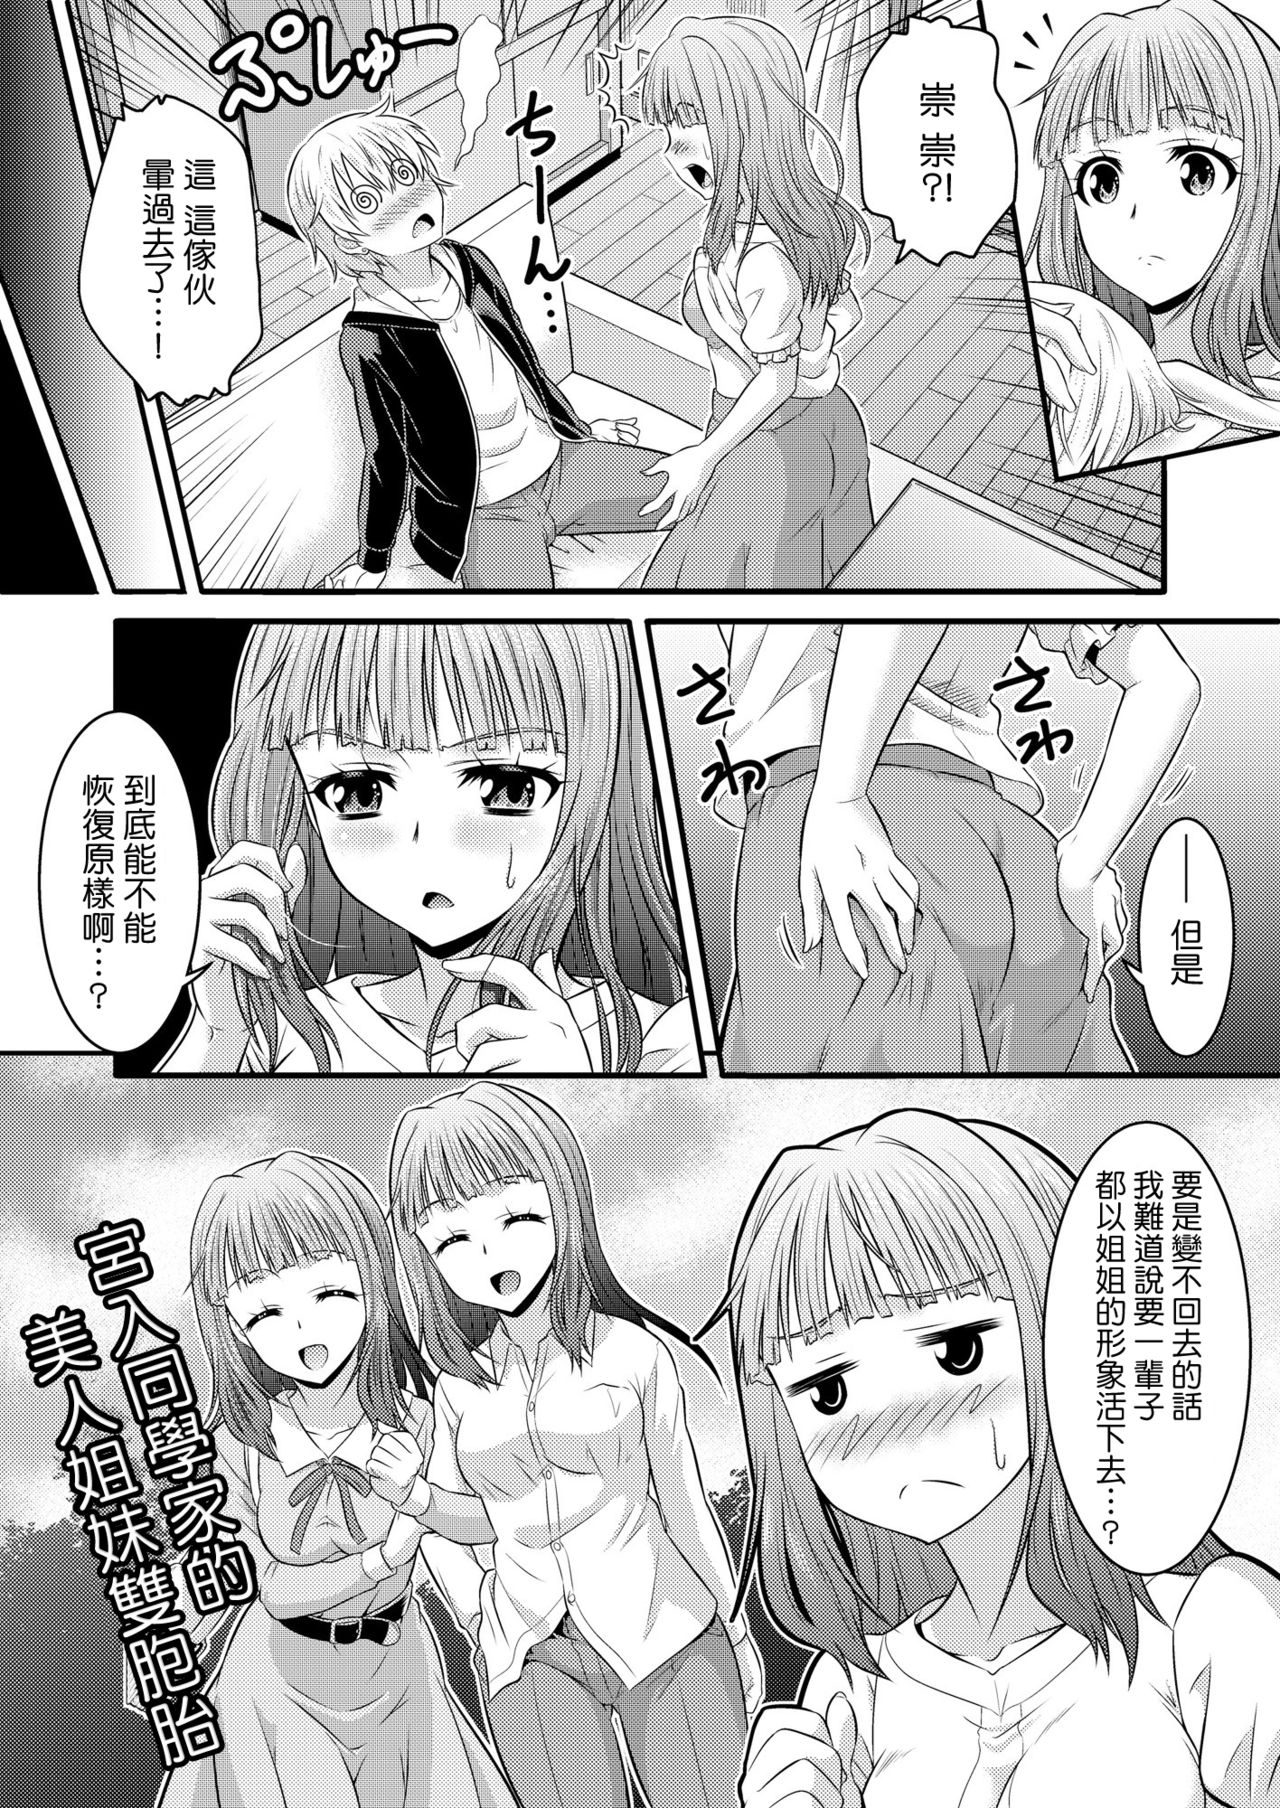 Metamorph ★ Coordination - I Become Whatever Girl I Crossdress As~ [Sister Arc, Classmate Arc] [Chinese] [瑞树汉化组] page 15 full